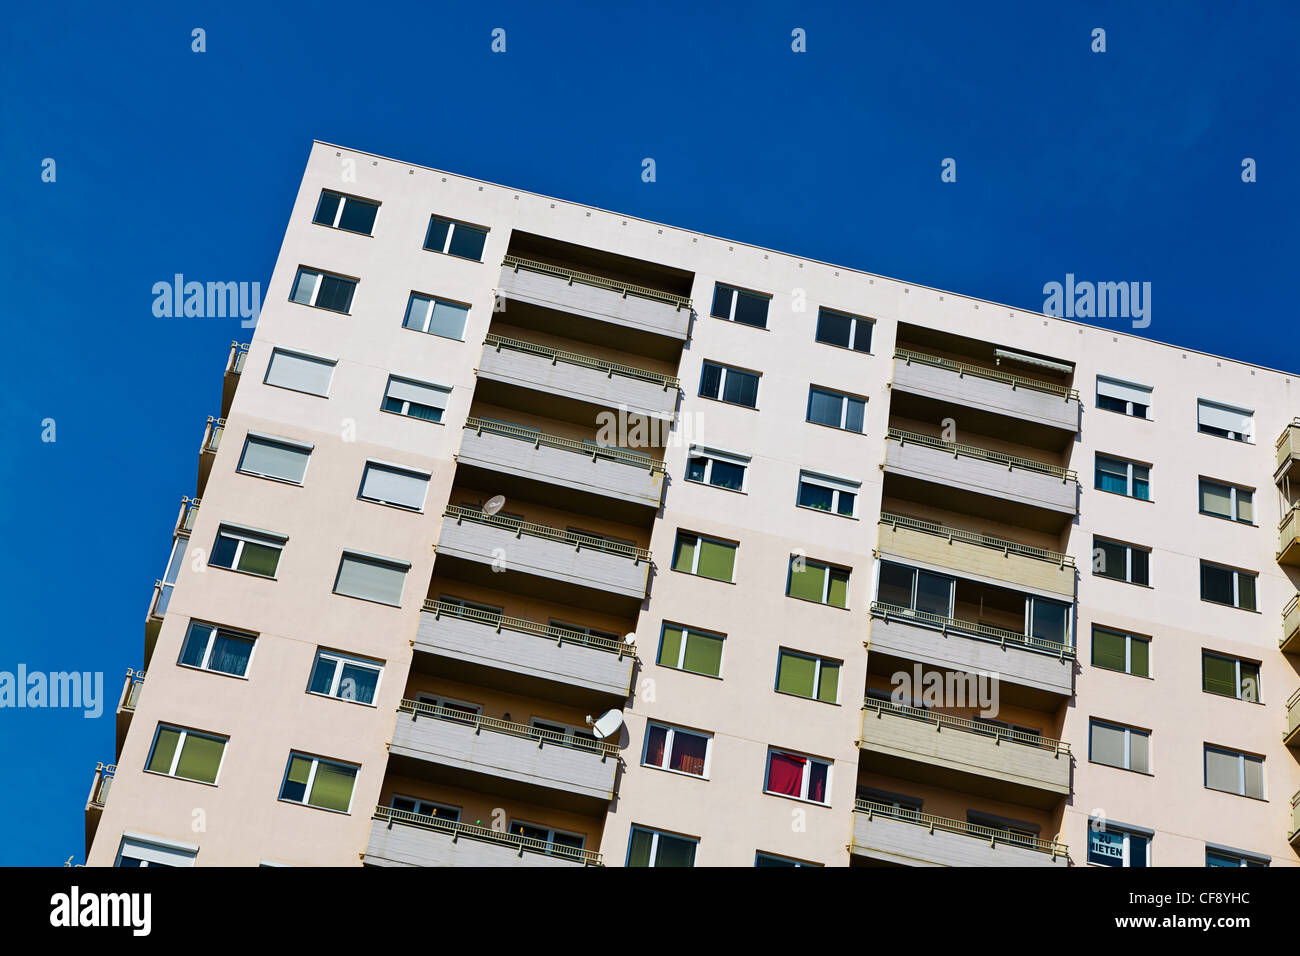 a high-rise apartment building with balconies than in a city Stock Photo